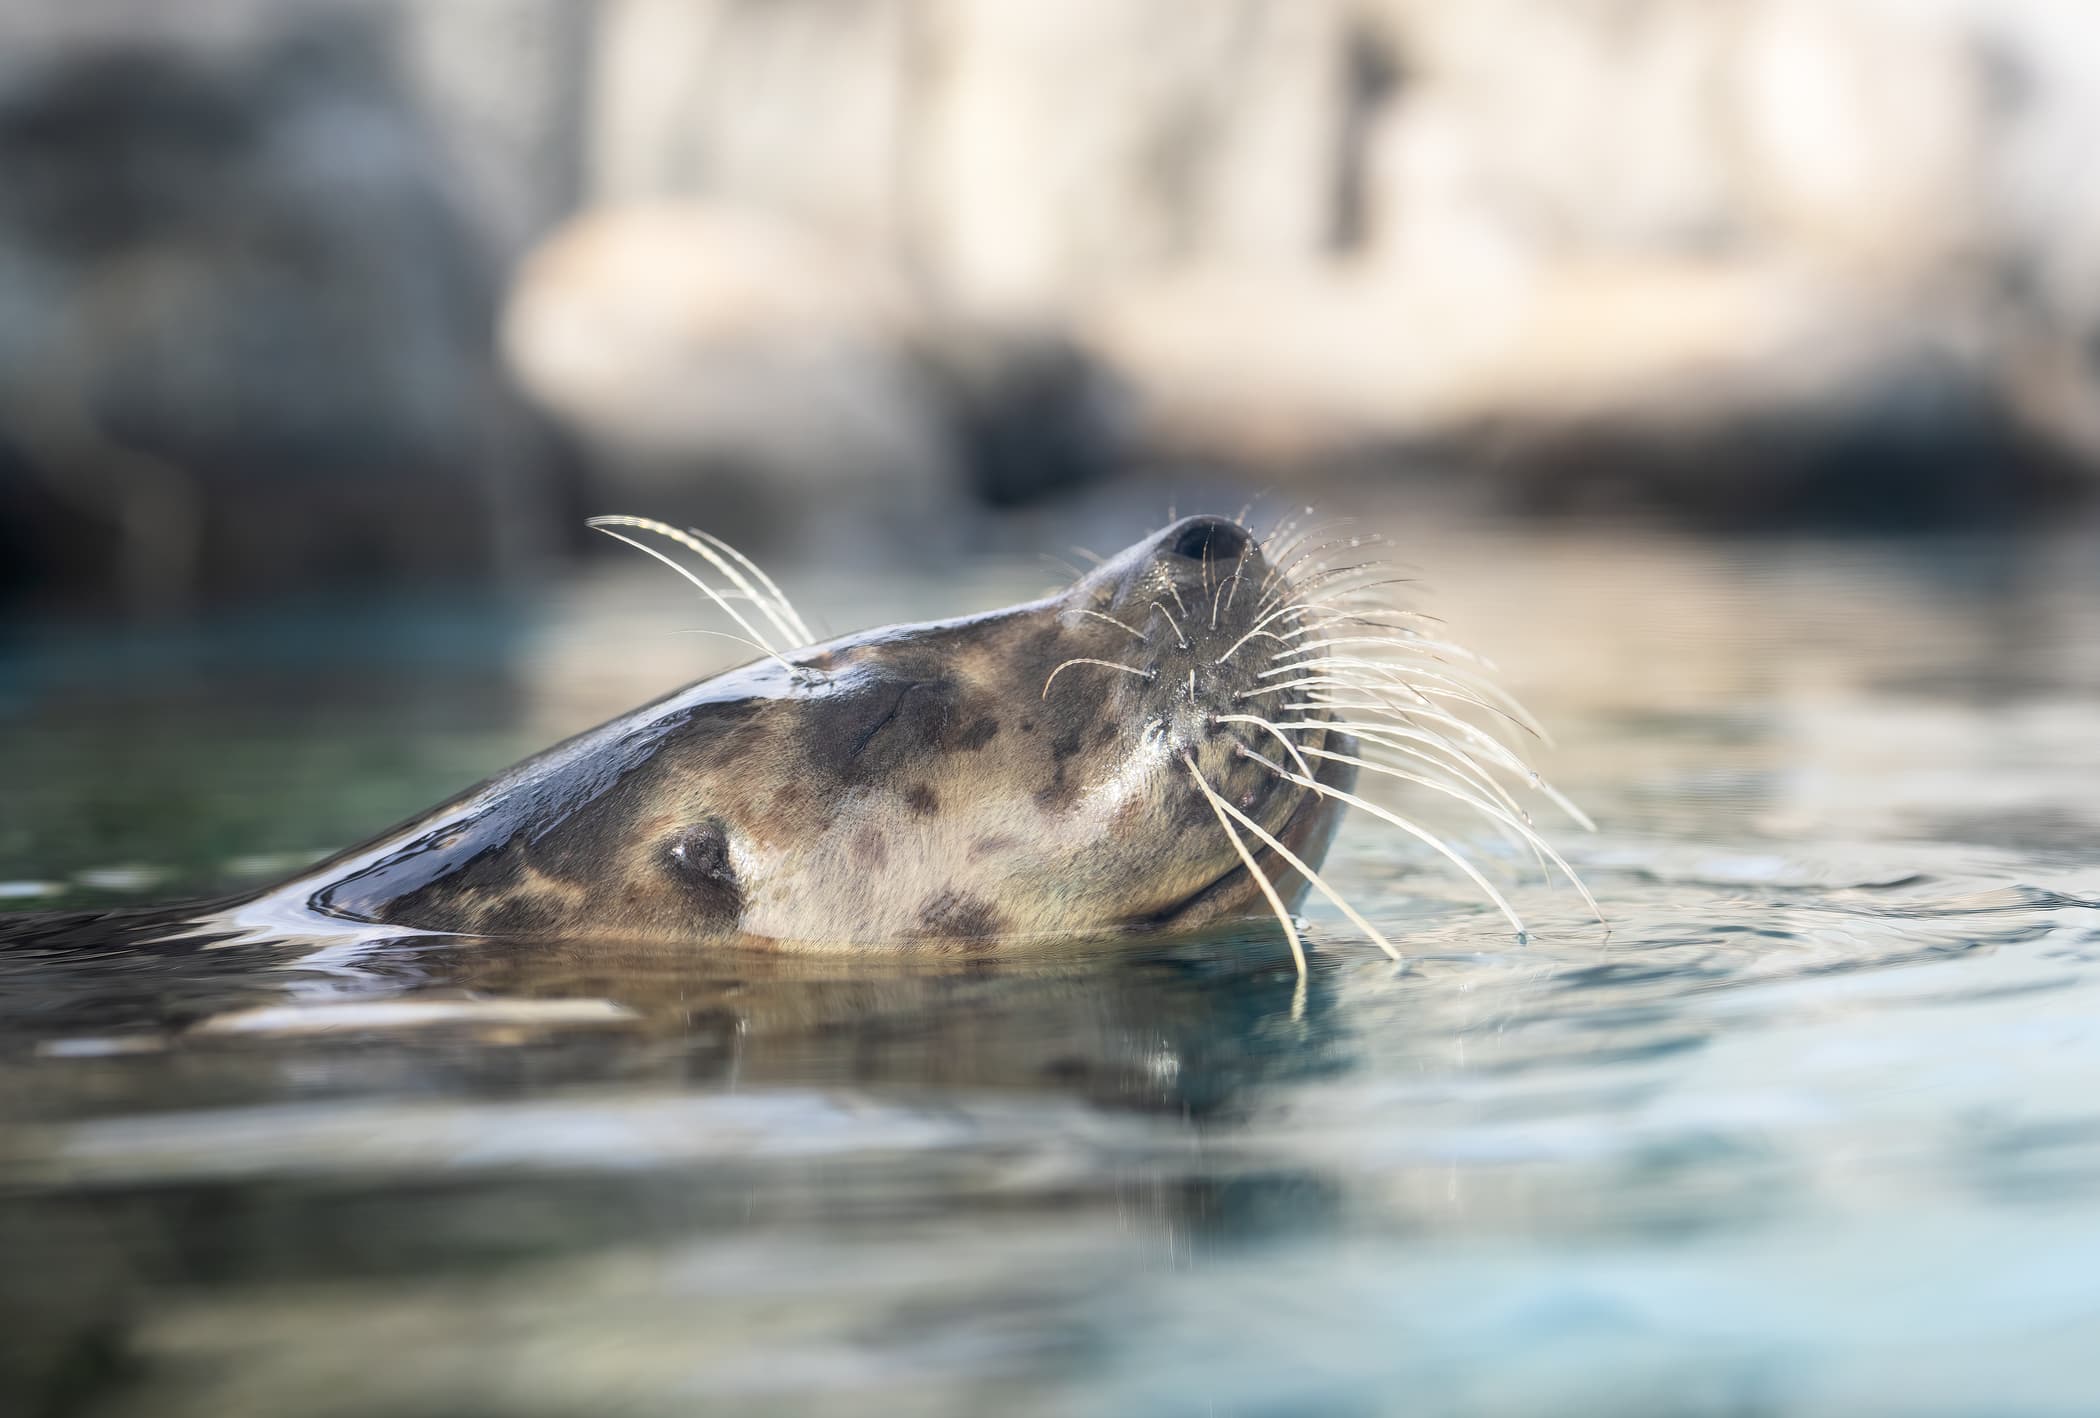 A harbor seal swims with its face above water, eyes closed peacefully